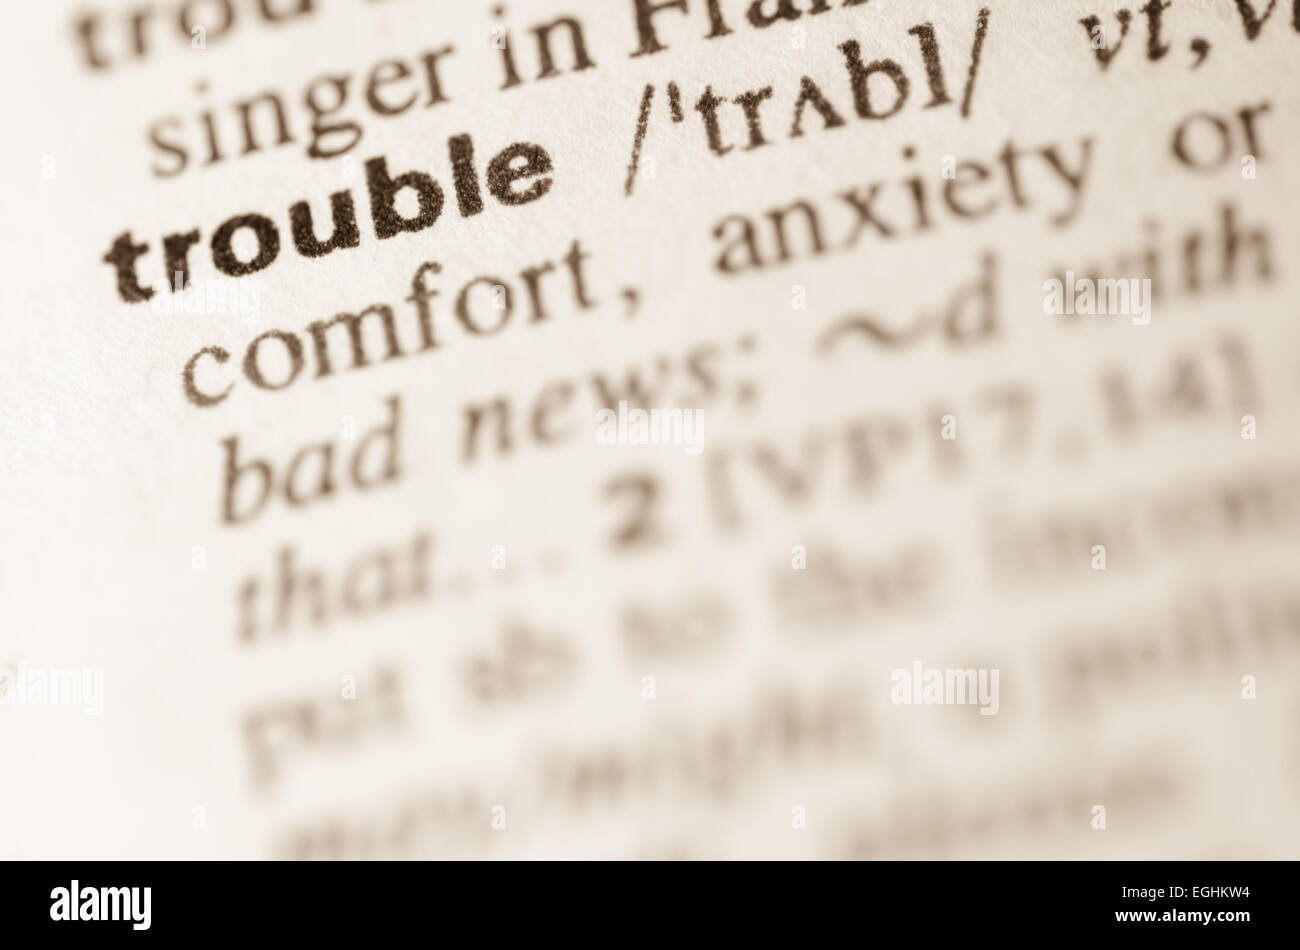 Definition of word trouble in dictionary Stock Photo